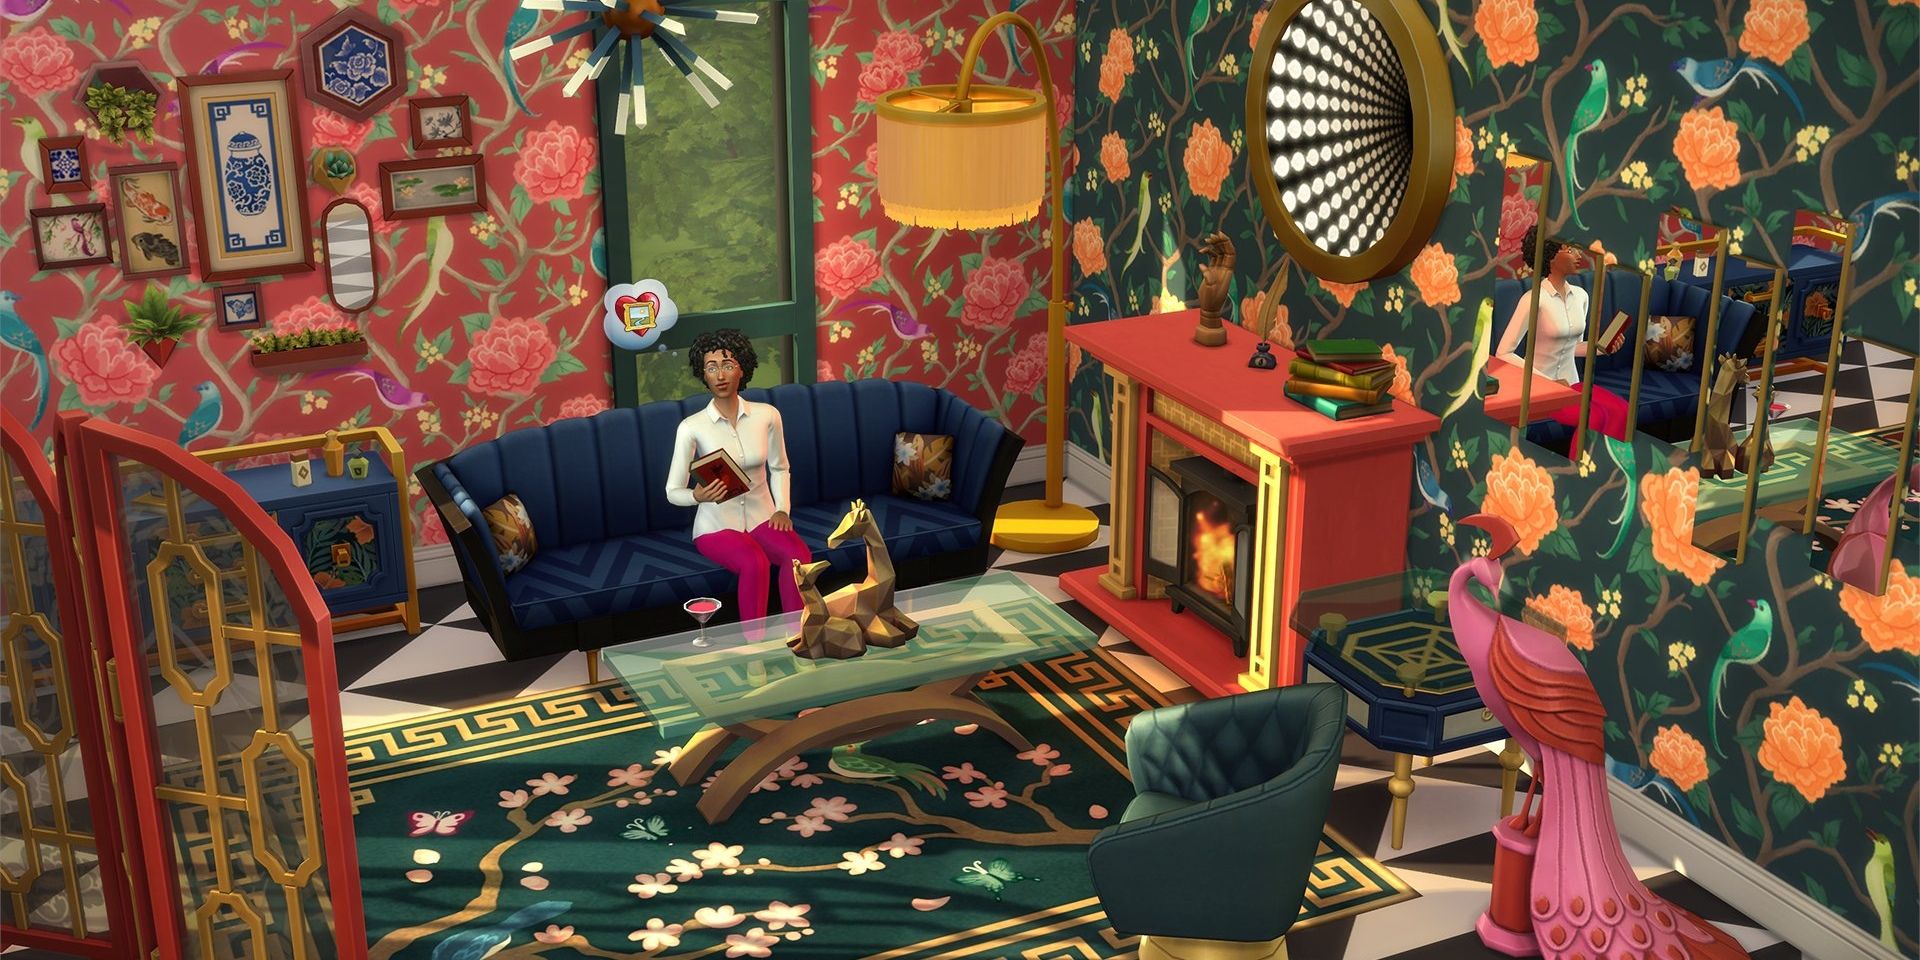 Sims 4 Decor To The Max Kit decorated room.